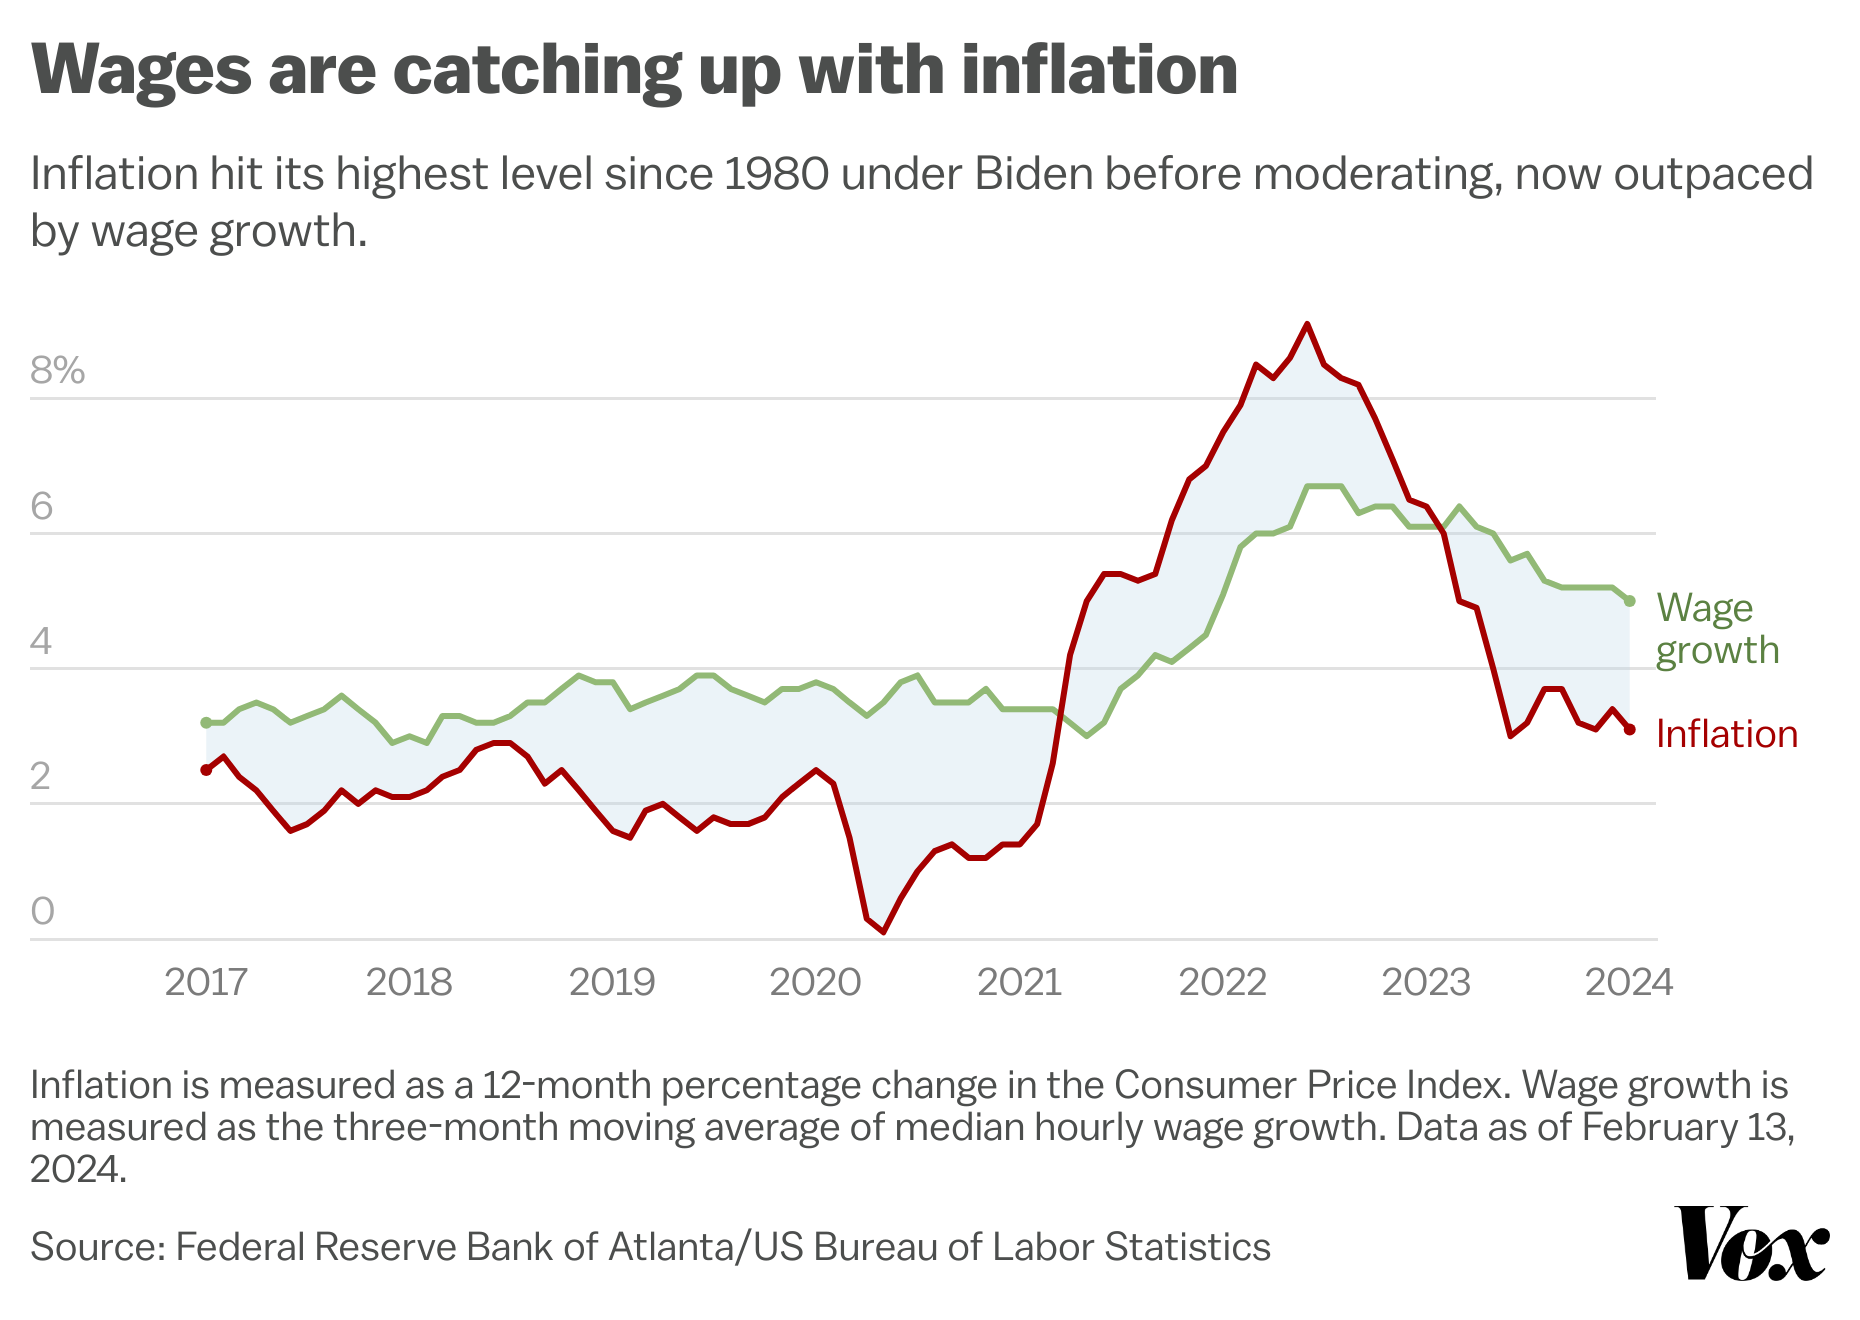 mDDrw_wages_are_catching_up_with_inflation.png